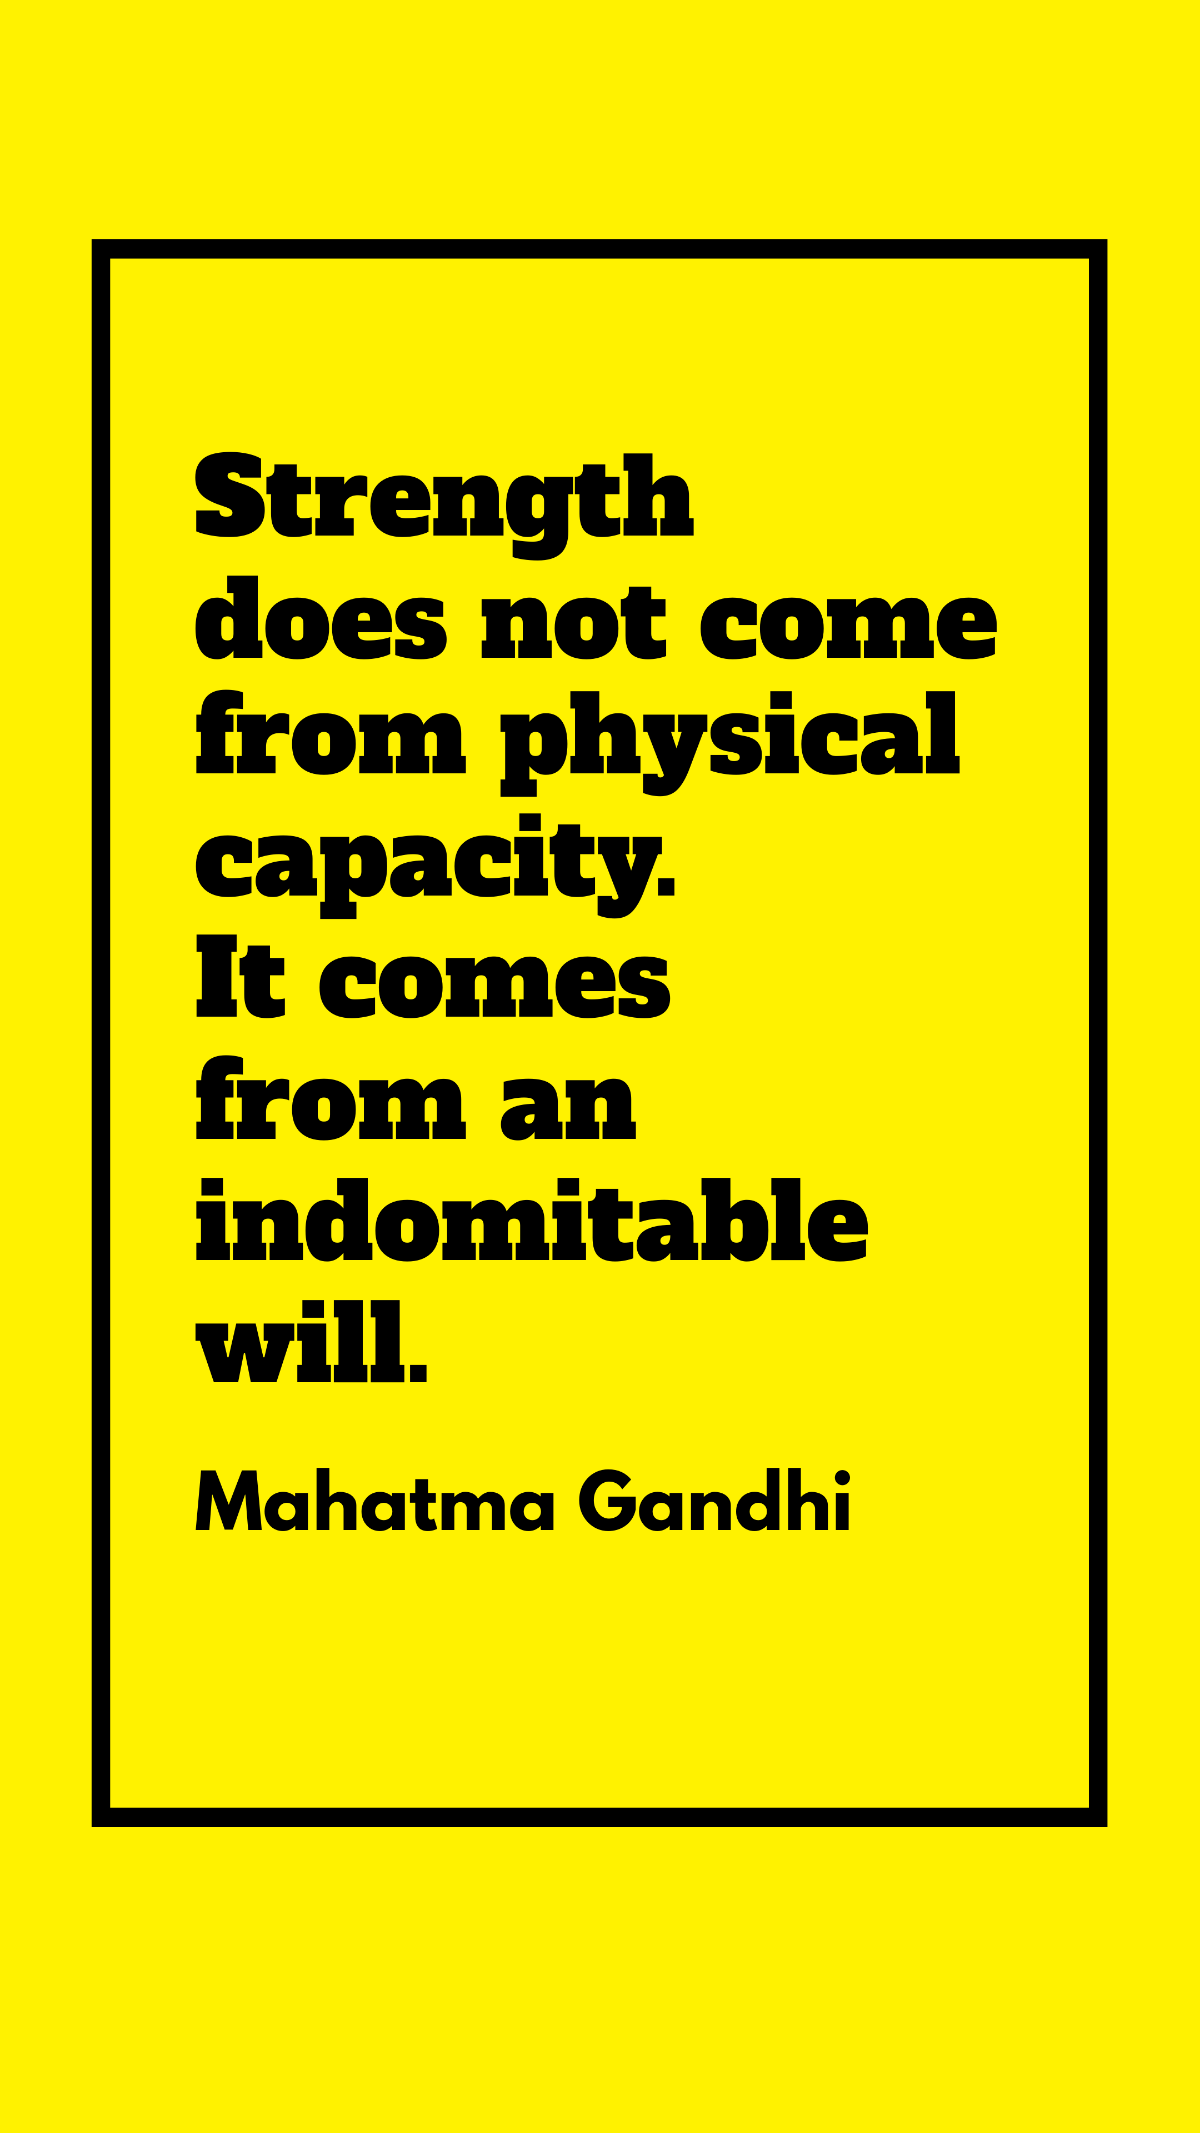 Mahatma Gandhi - Strength does not come from physical capacity. It comes from an indomitable will. Template